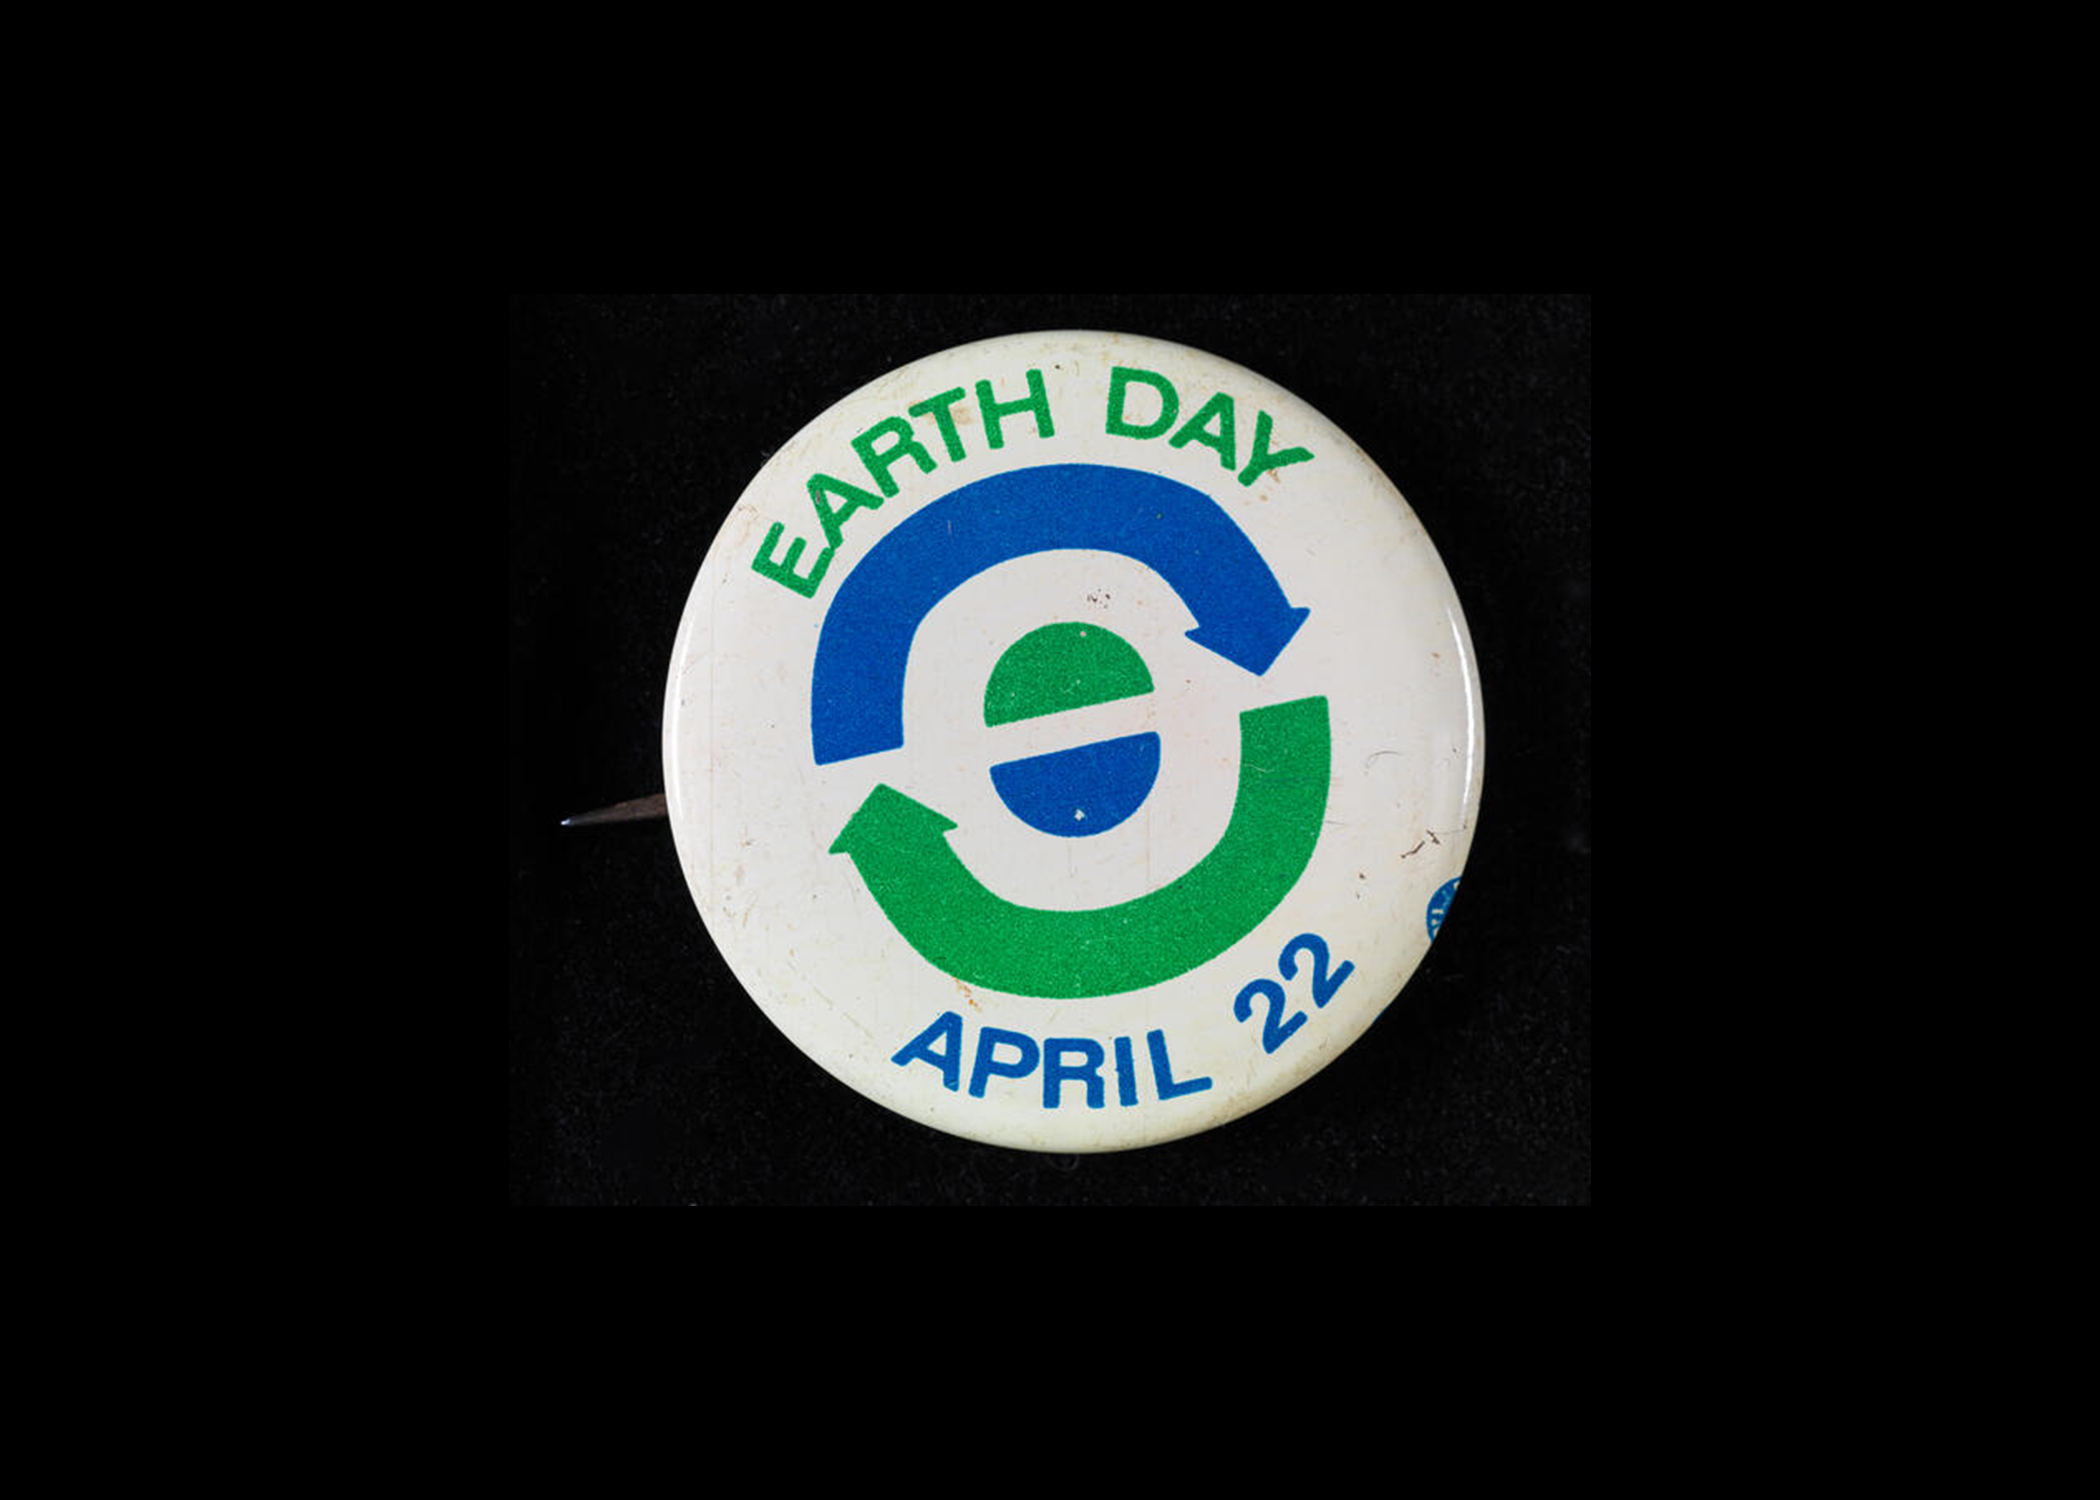 A white button that reads Earth Day April 22 with blue and green arrows and semi circles that symbolize recycling and the earth